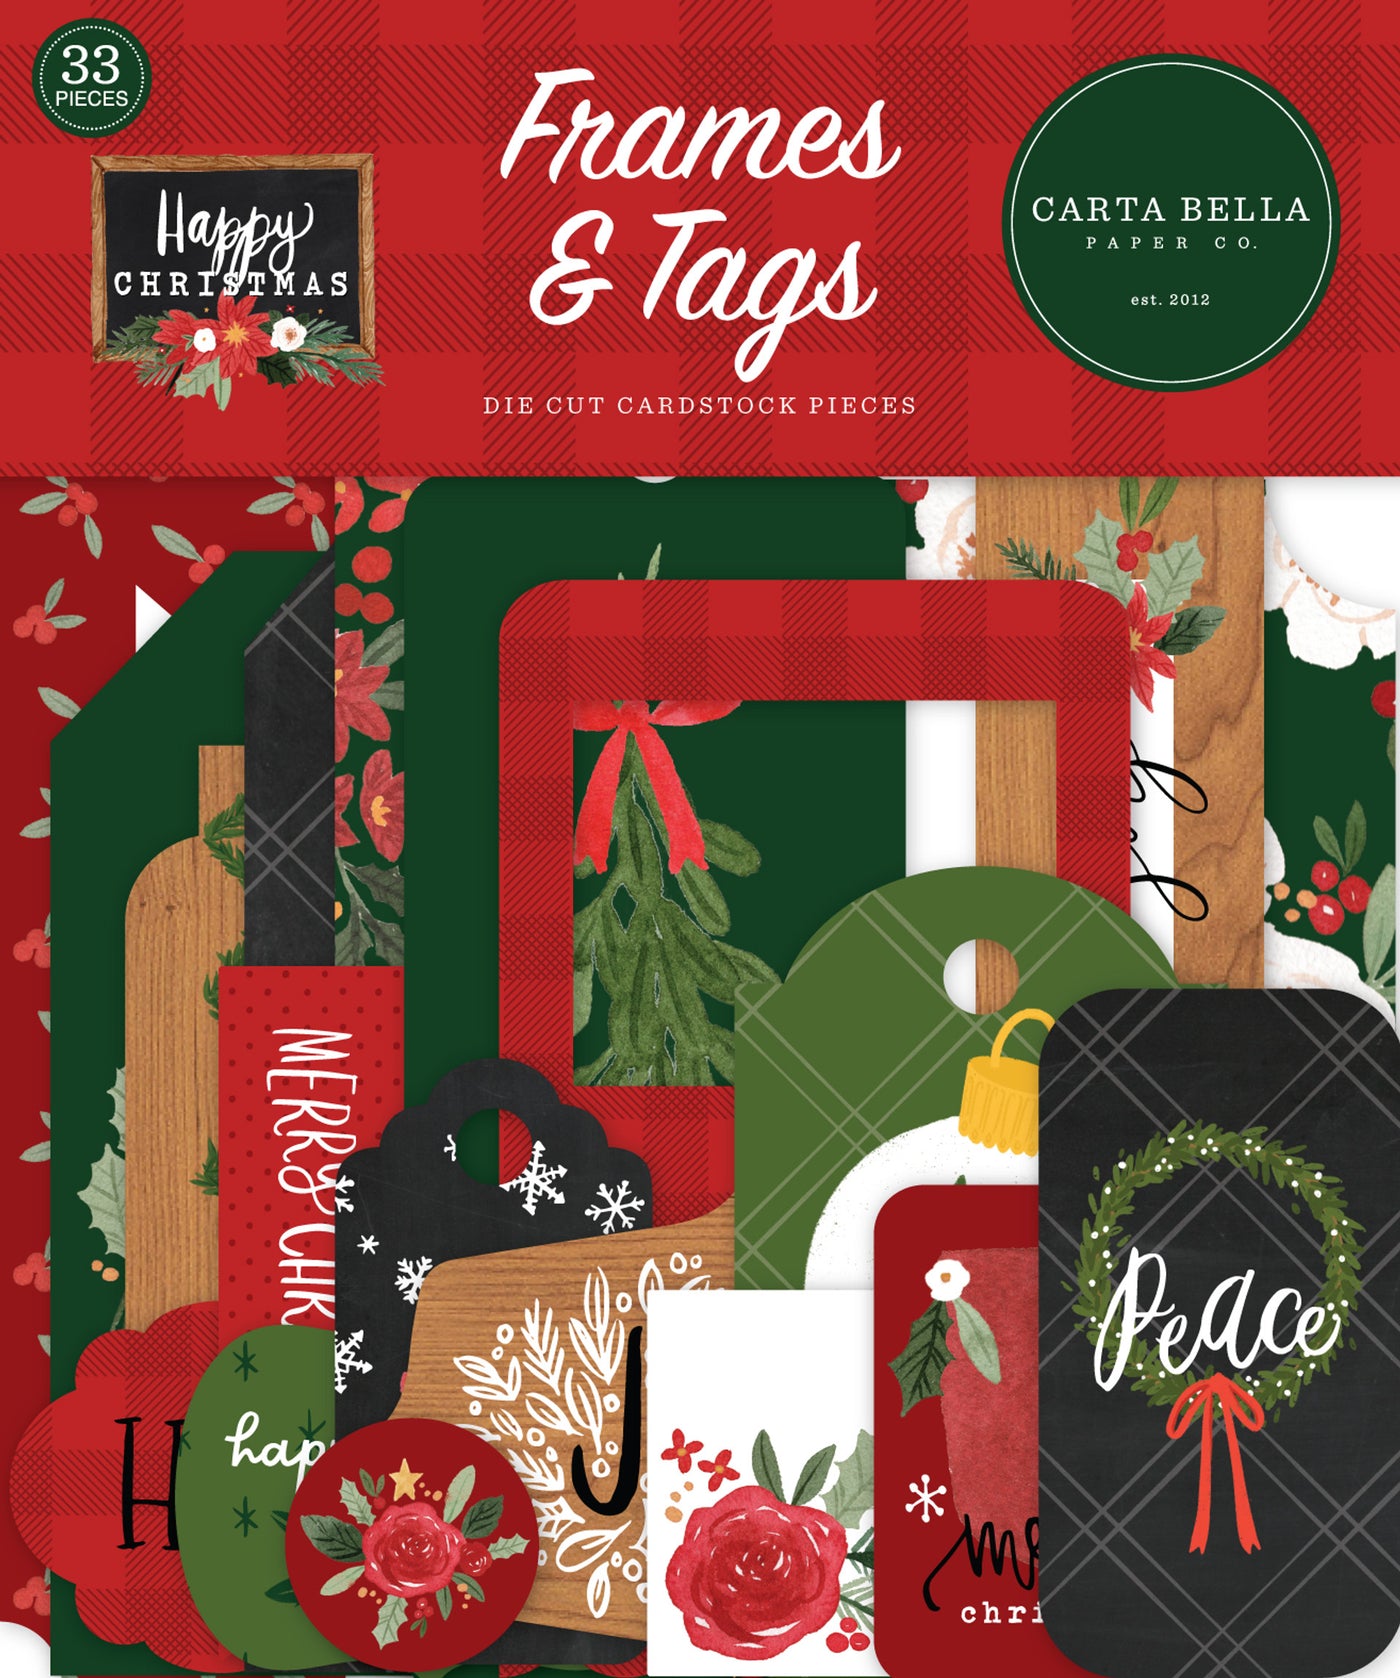 Happy Christmas Frames & Tags Die Cut Cardstock Pack includes 33 die-cut shapes ready to embellish any project.